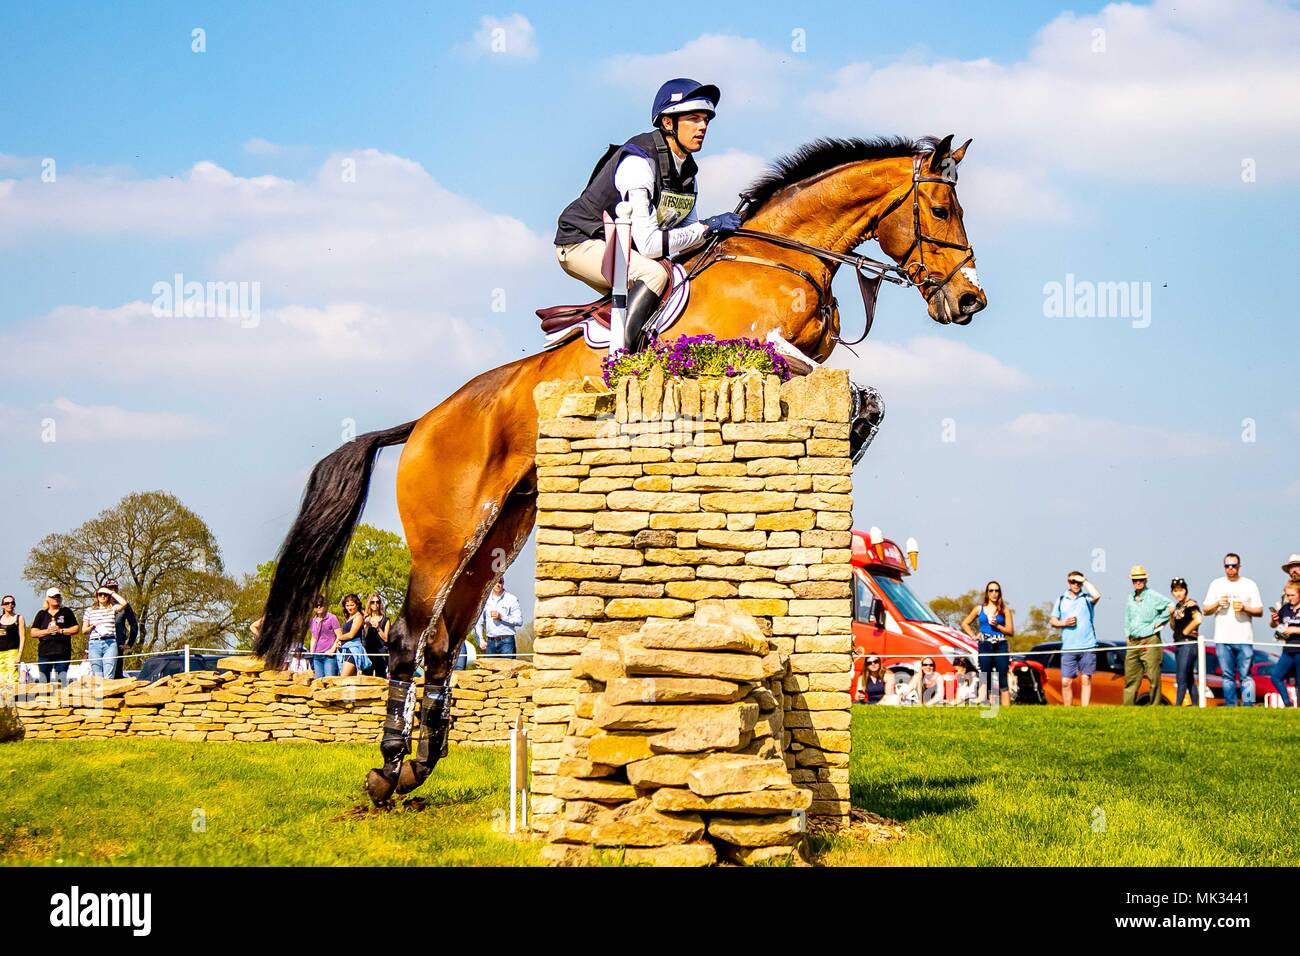 Cross Country. William Coleman. Obos O'Reilly. USA. Horsequest Quarry. Fence 4. Mitsubishi Badminton Horse Trials. Badminton. UK.  05/05/2018. Stock Photo